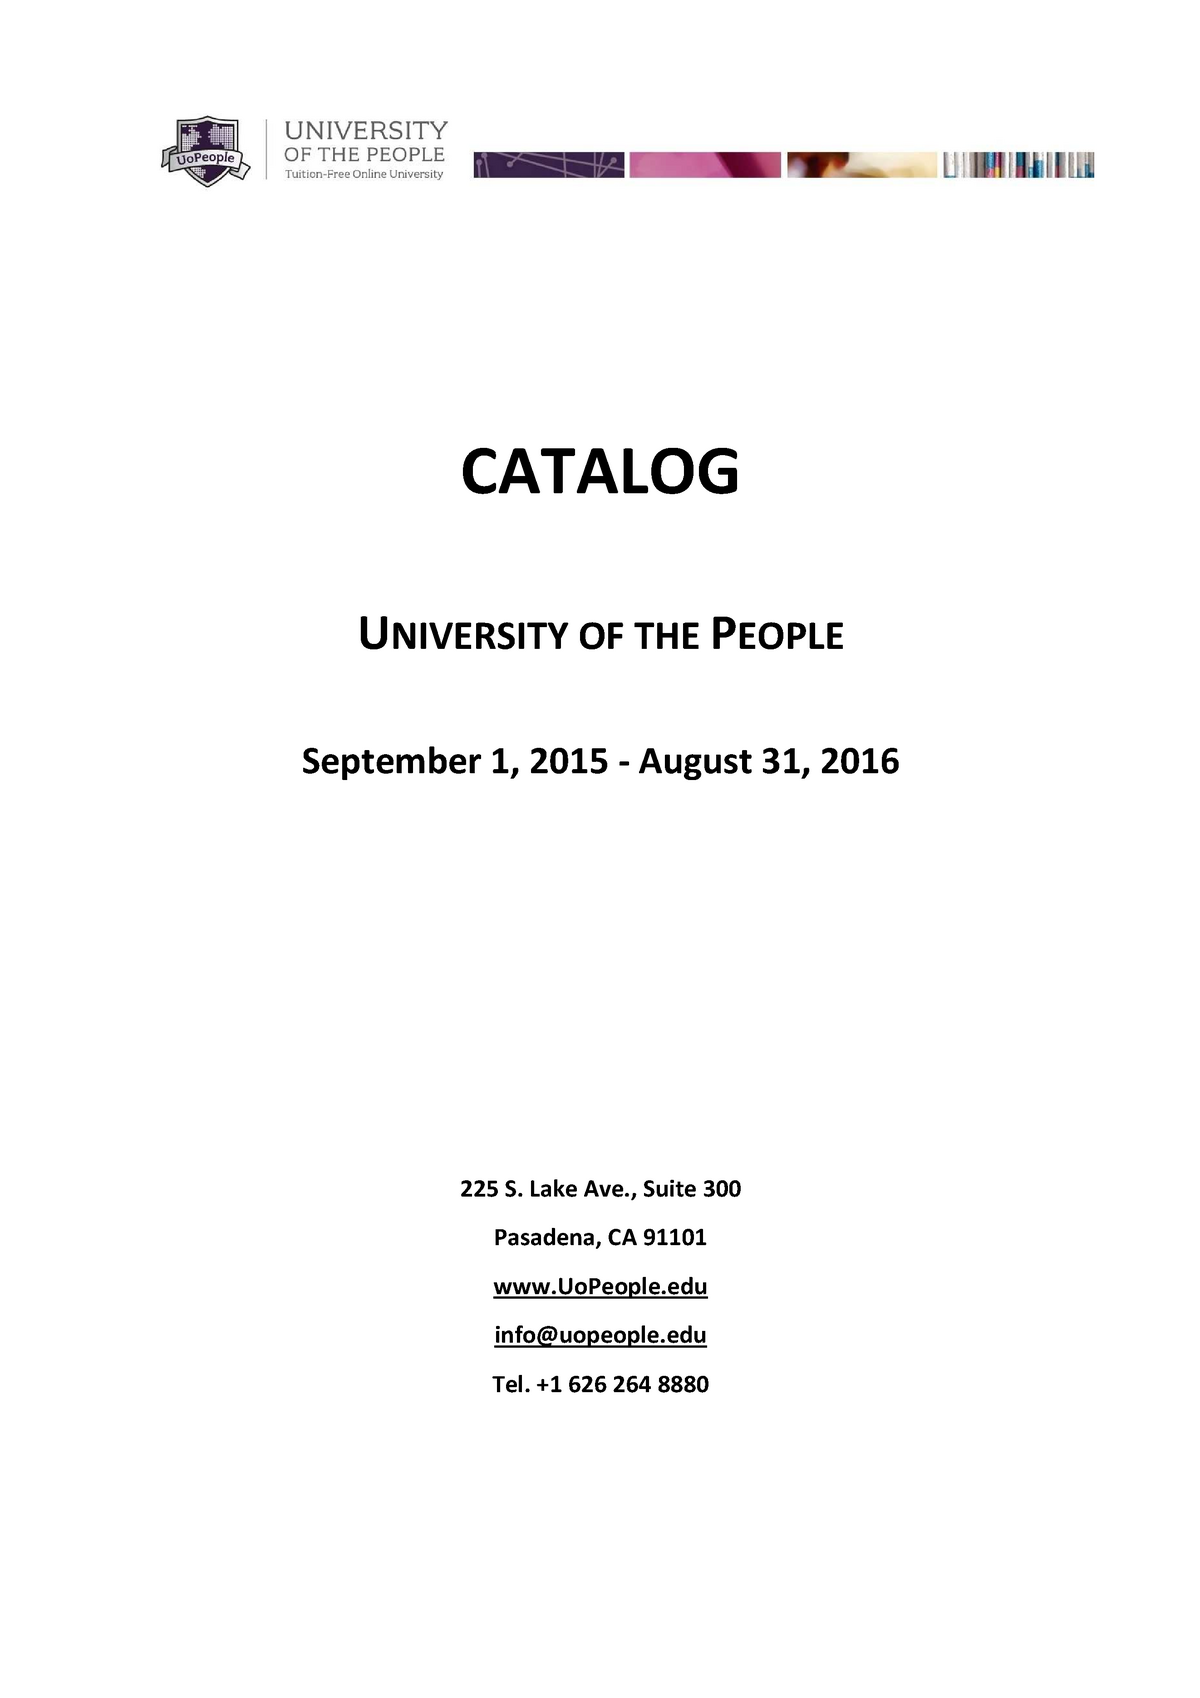 University catalog which you can use for policy purposes CATALOG